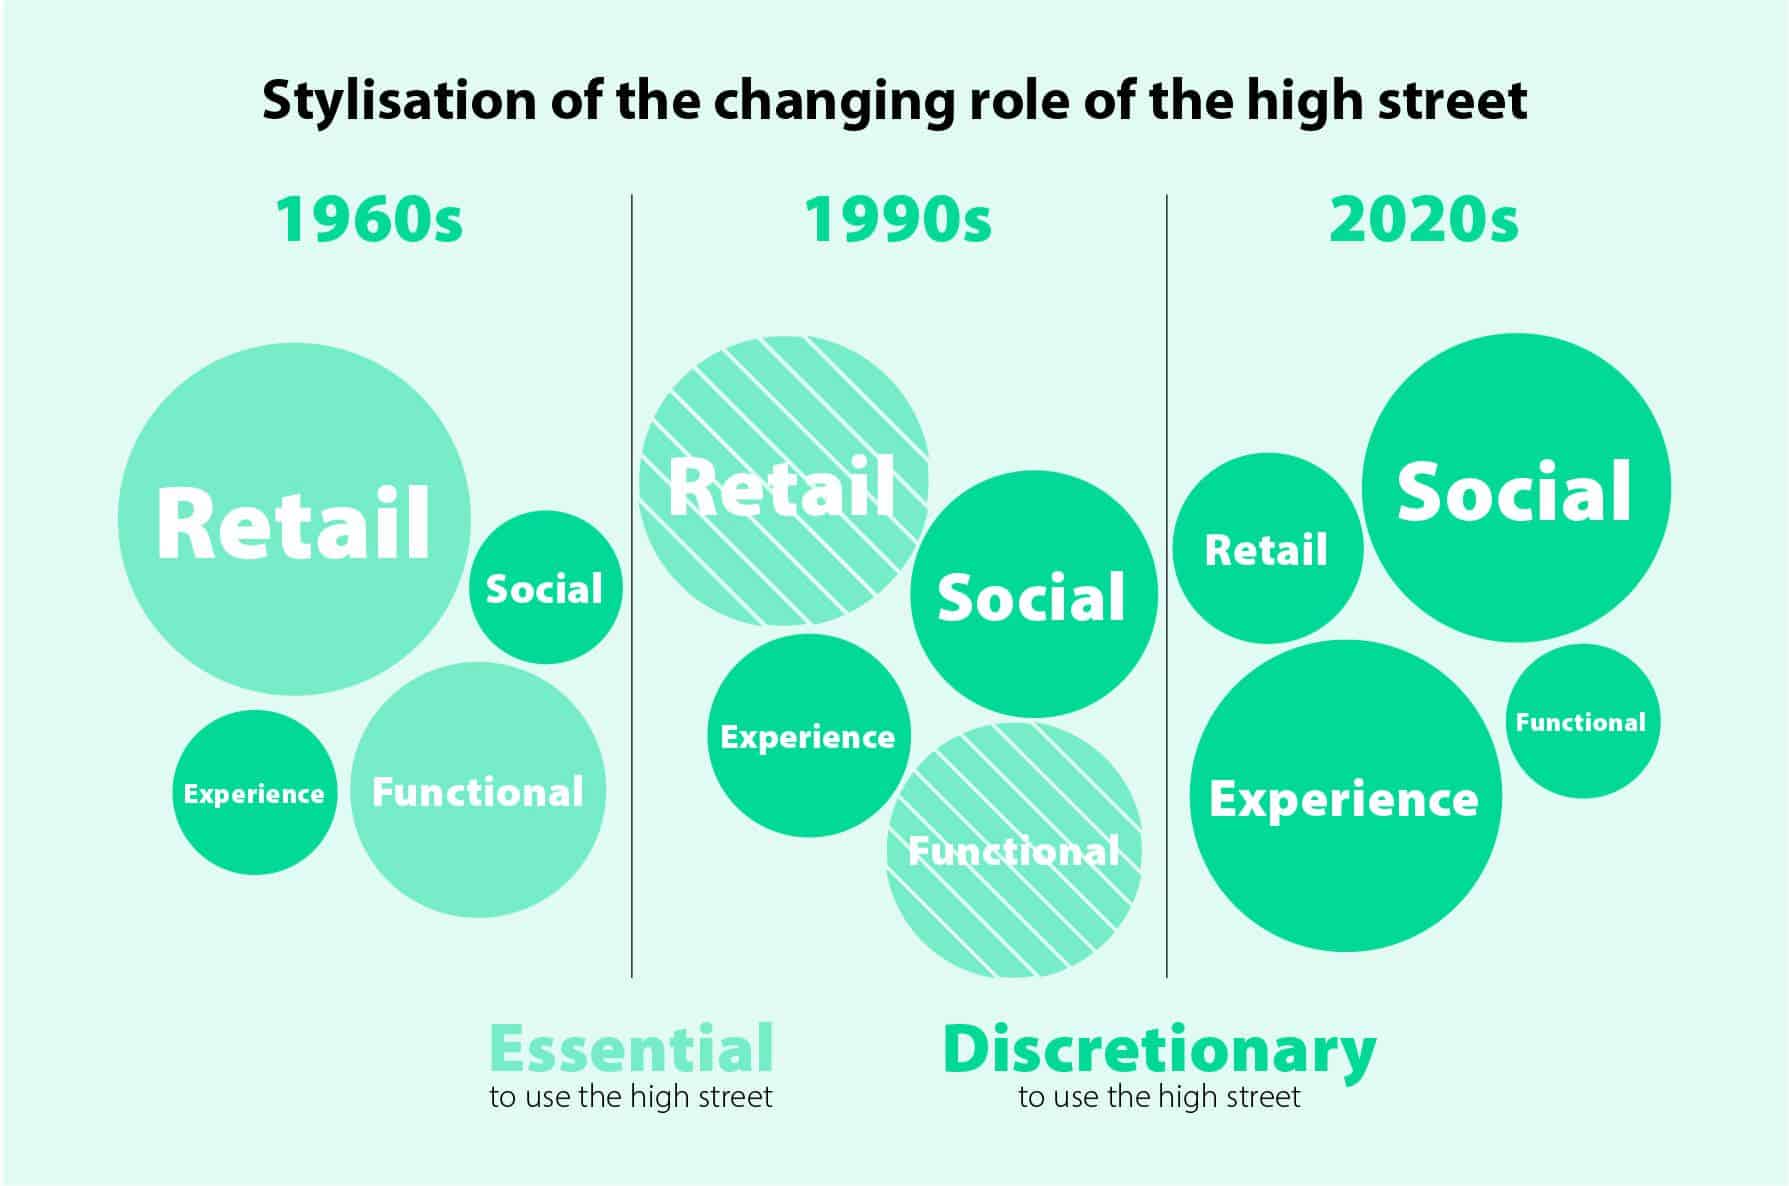 Graph showing stylisation of the changing role of high streets